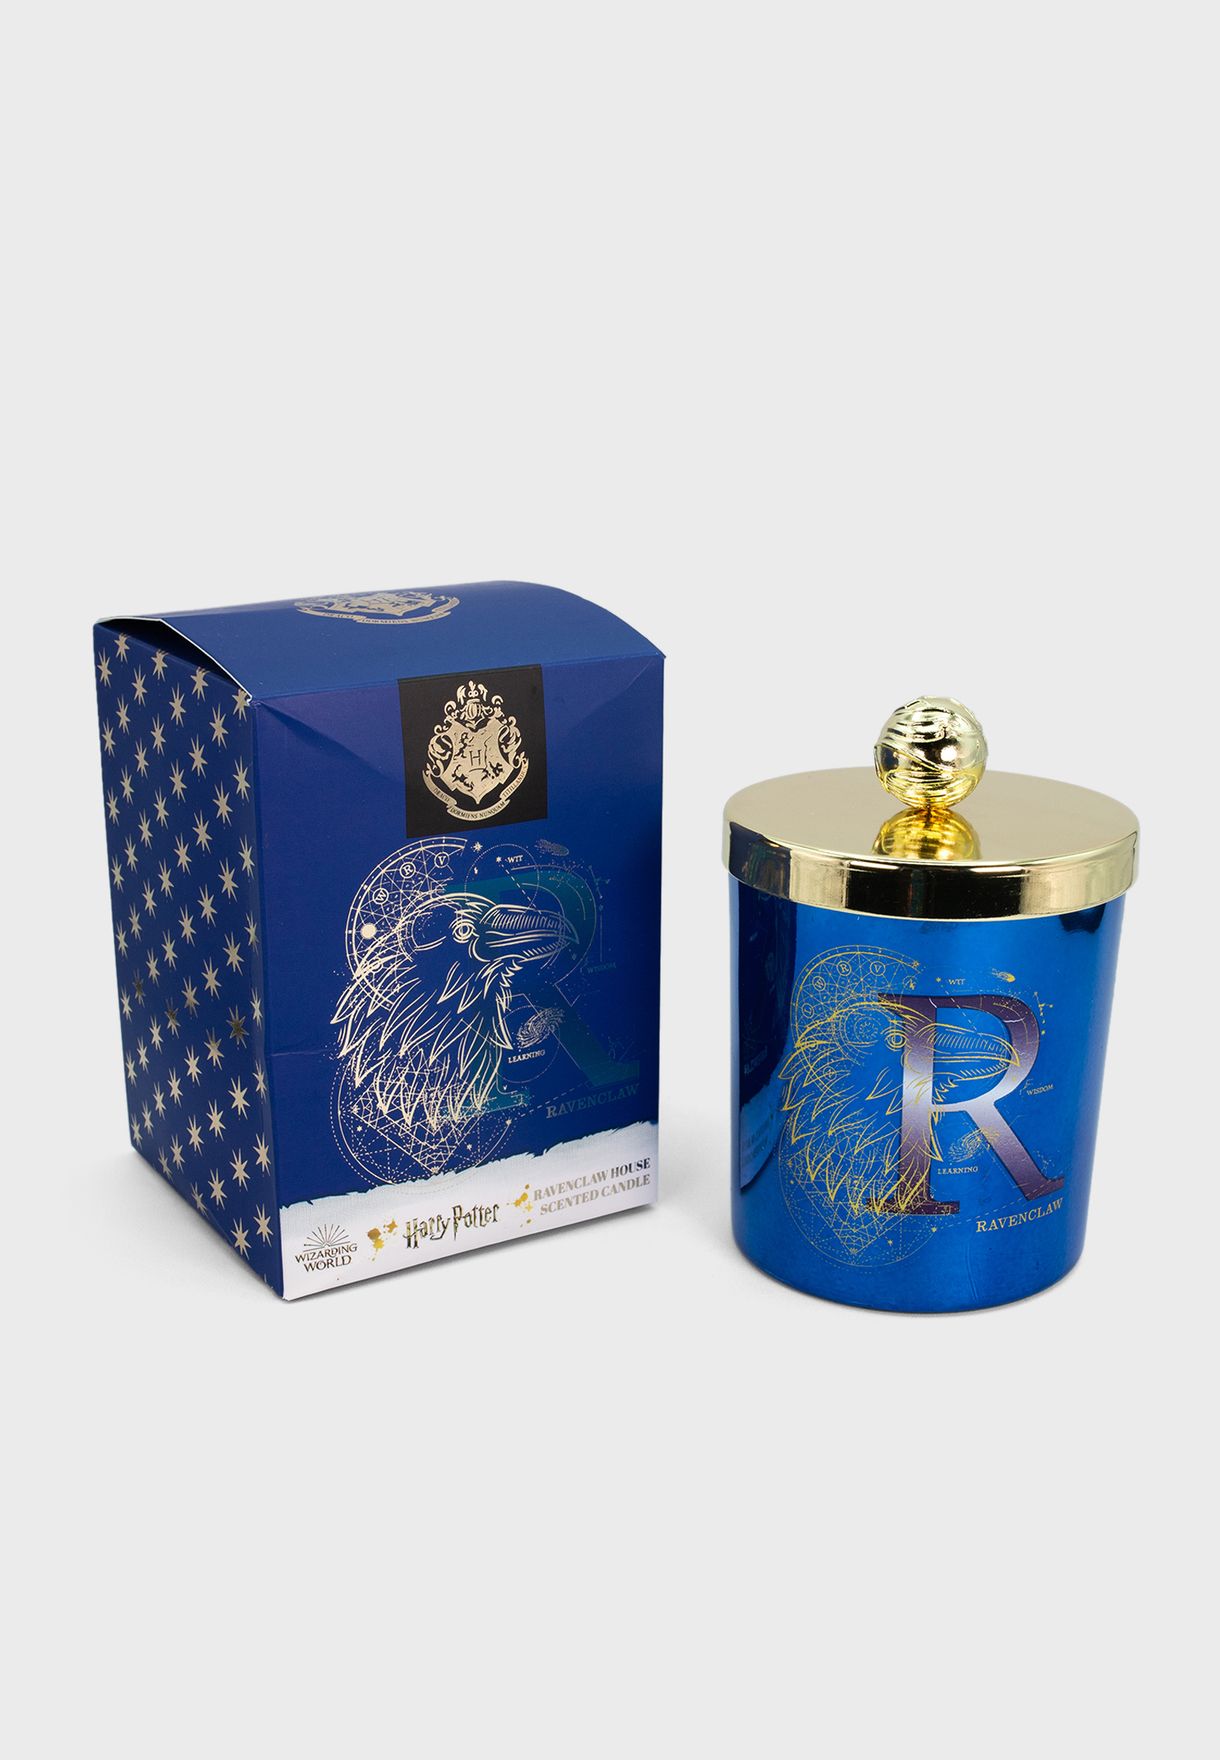 Harry Potter Ravenclaw Premium Soy Wax Candle